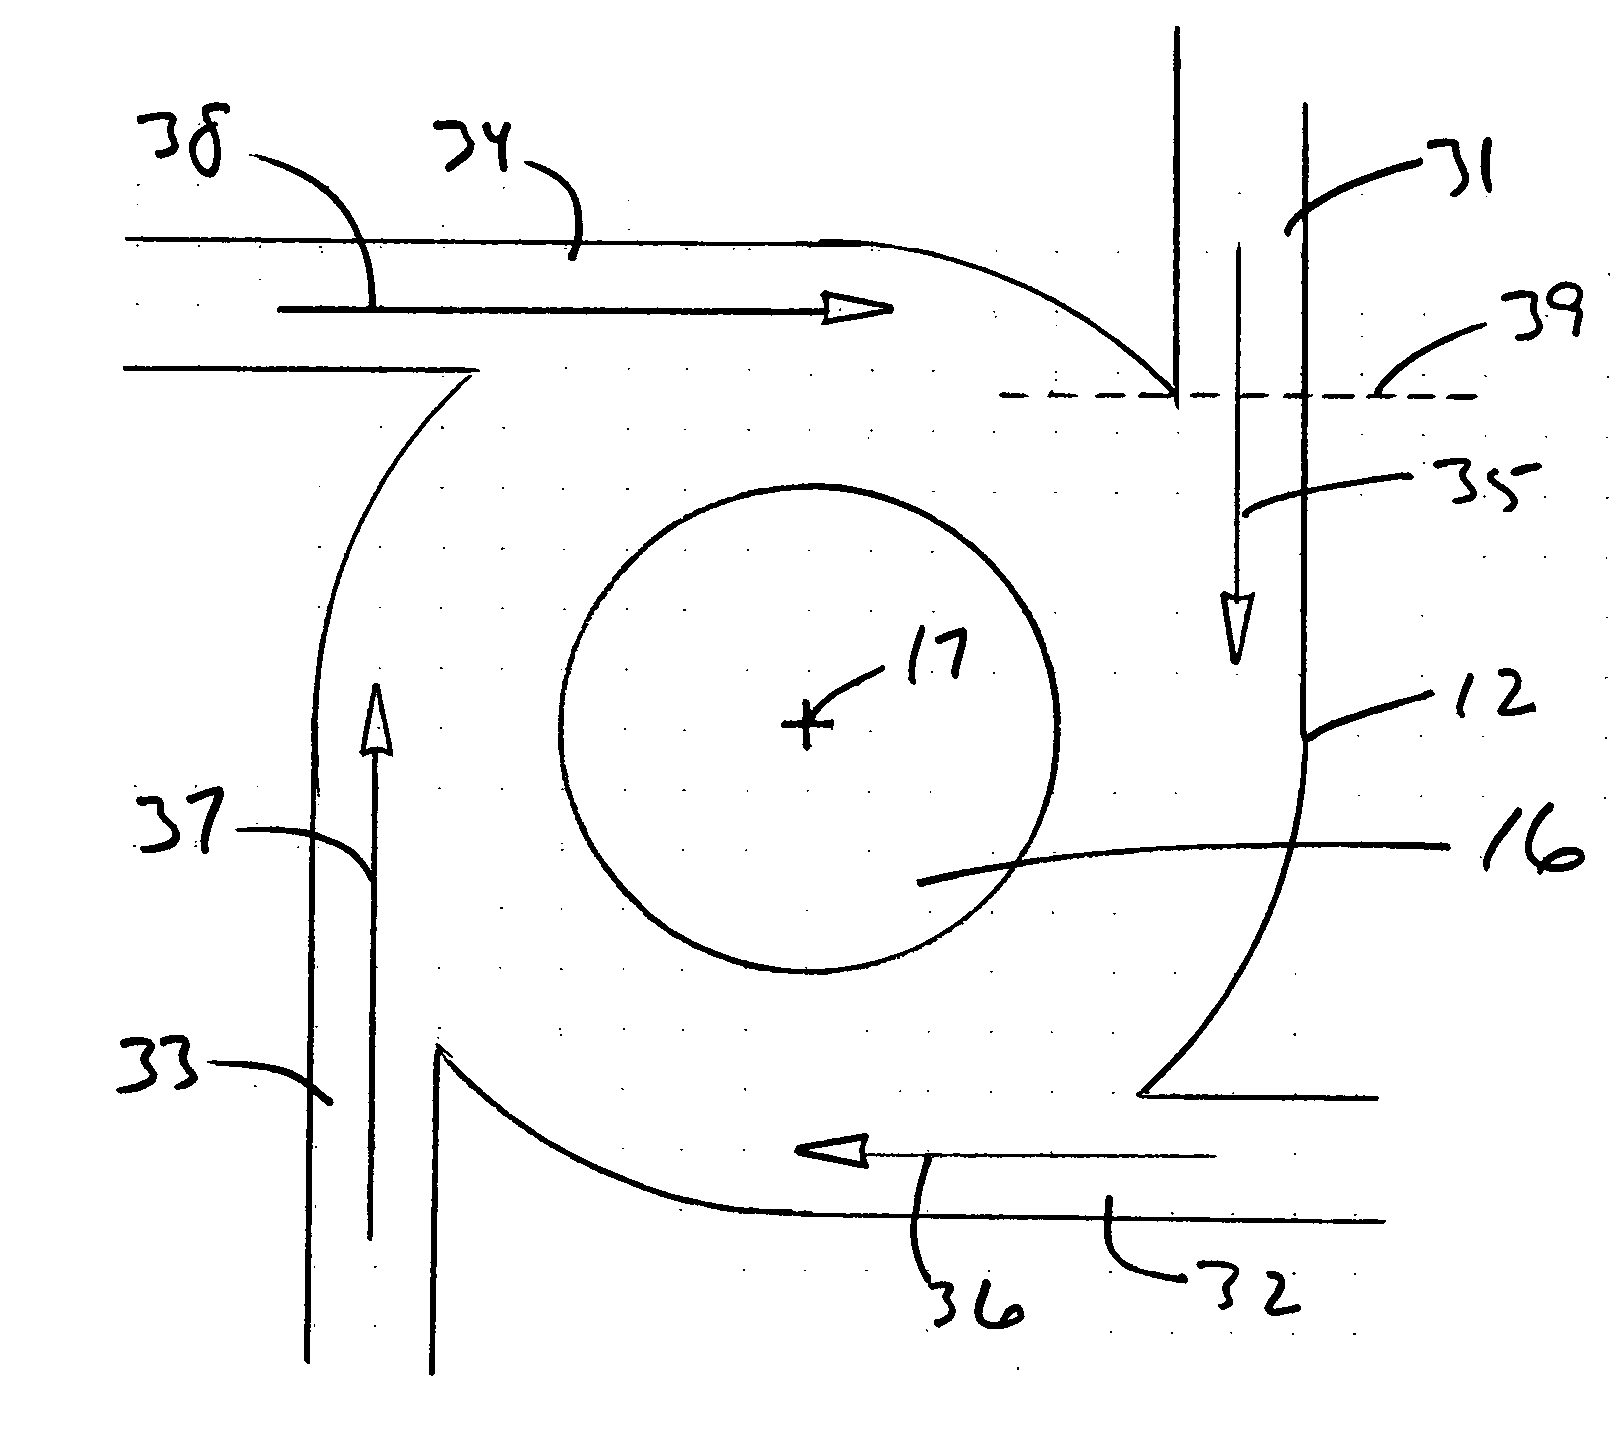 Throttleable swirling injector for combustion chambers